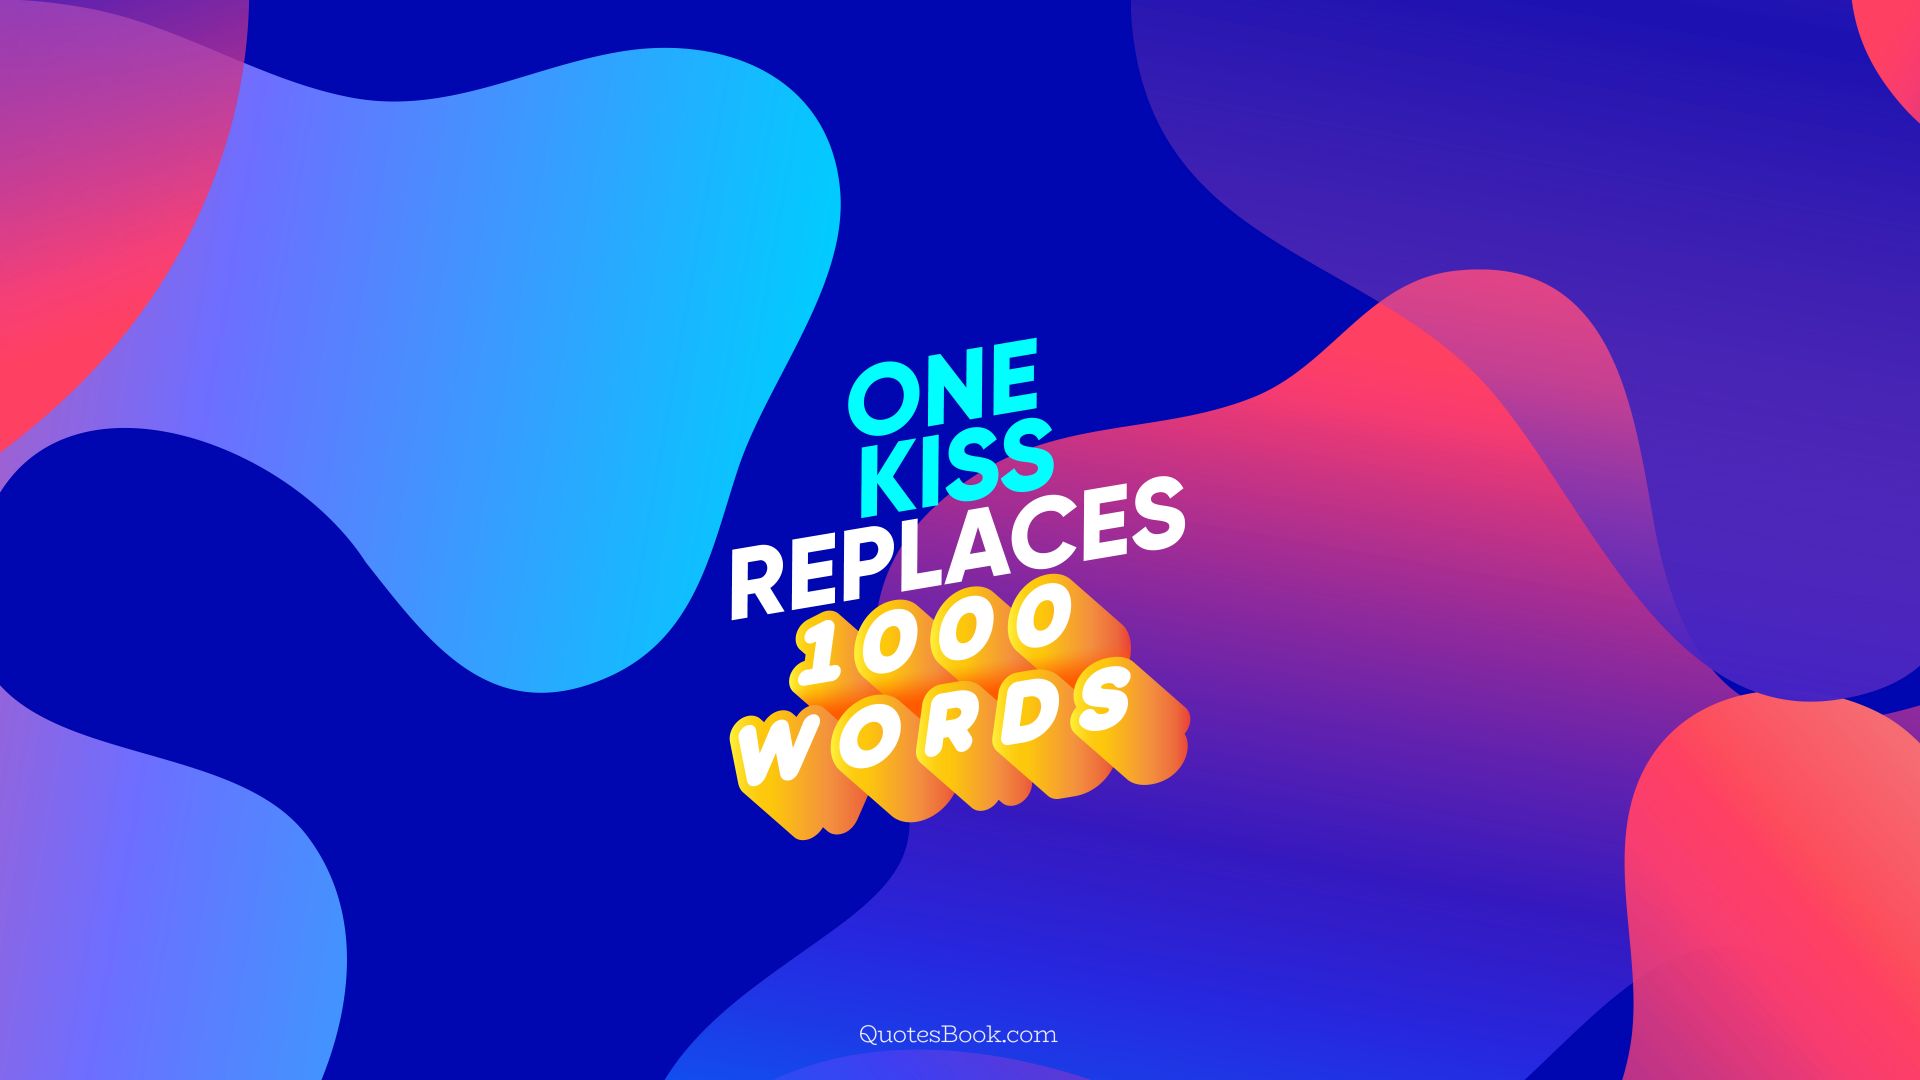 One kiss replaces 1000 words. - Quote by QuotesBook